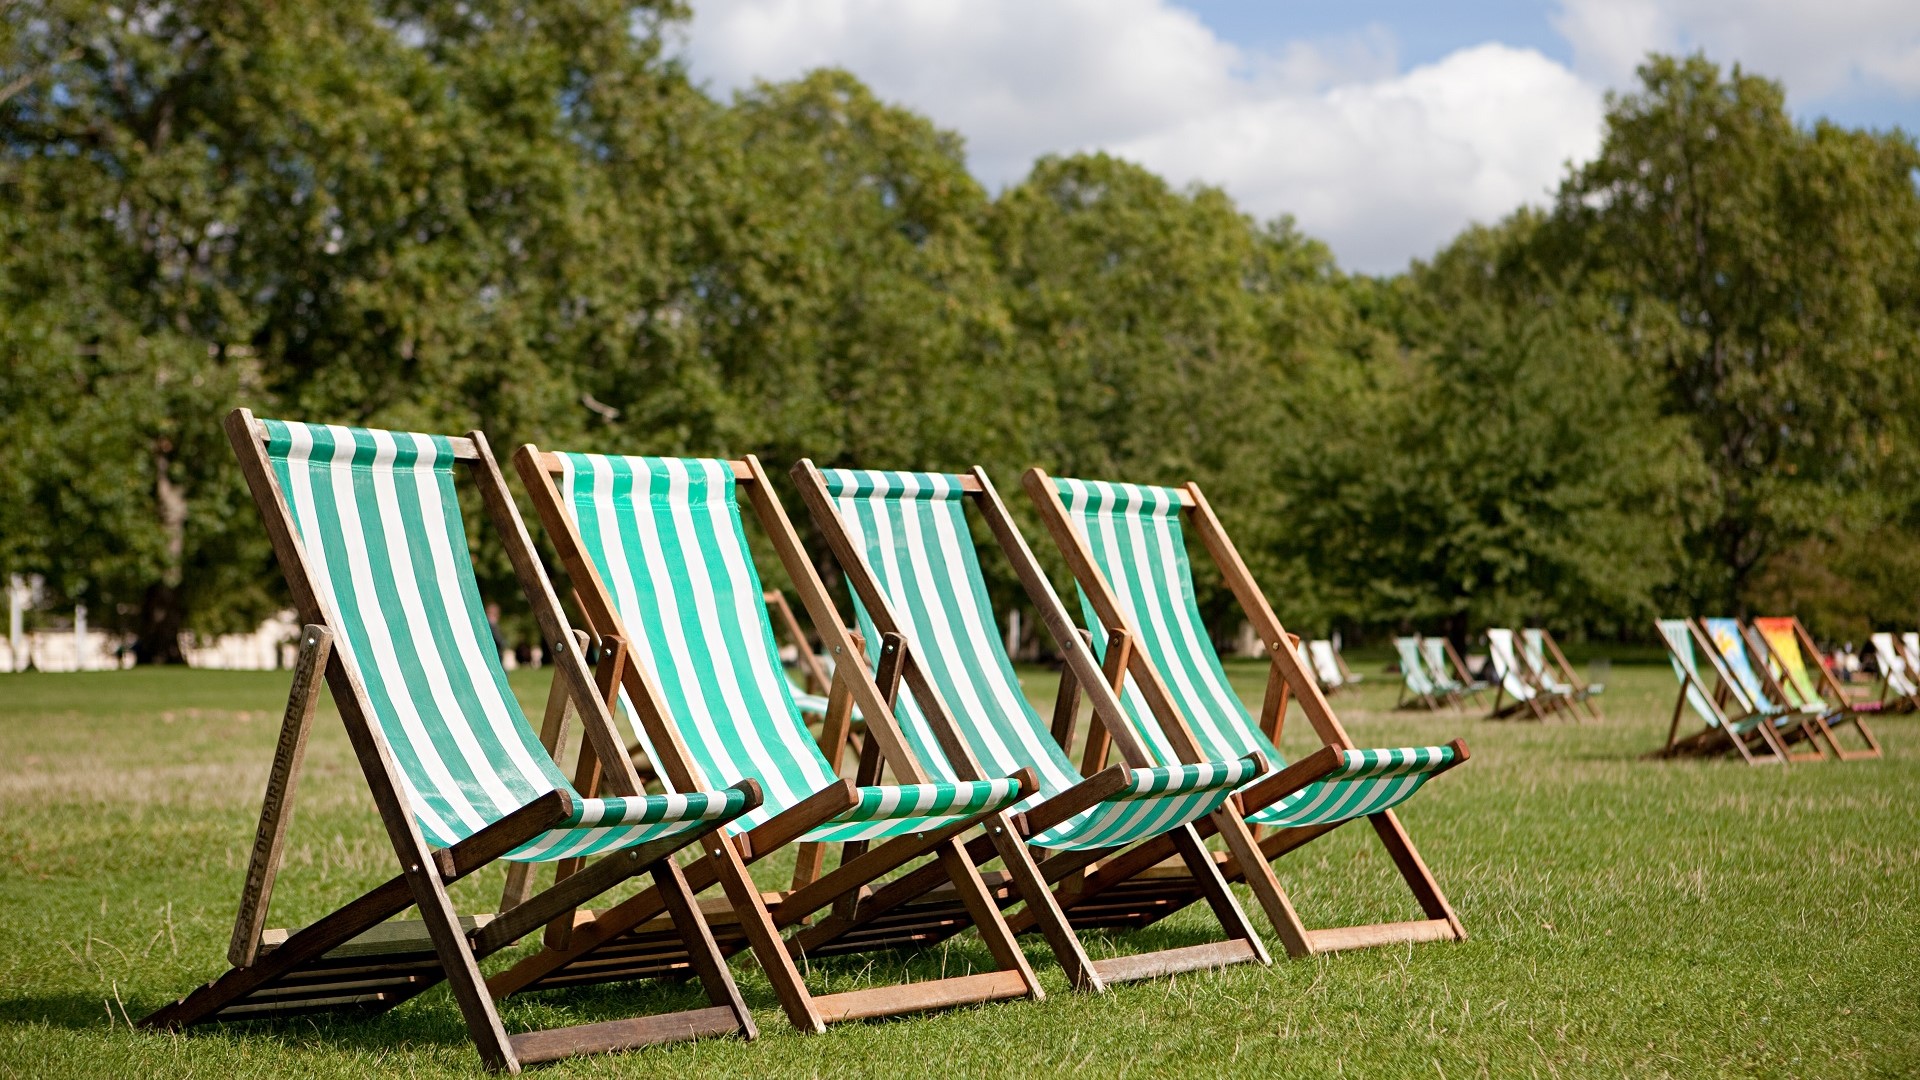 striped lawn chairs in a park in London